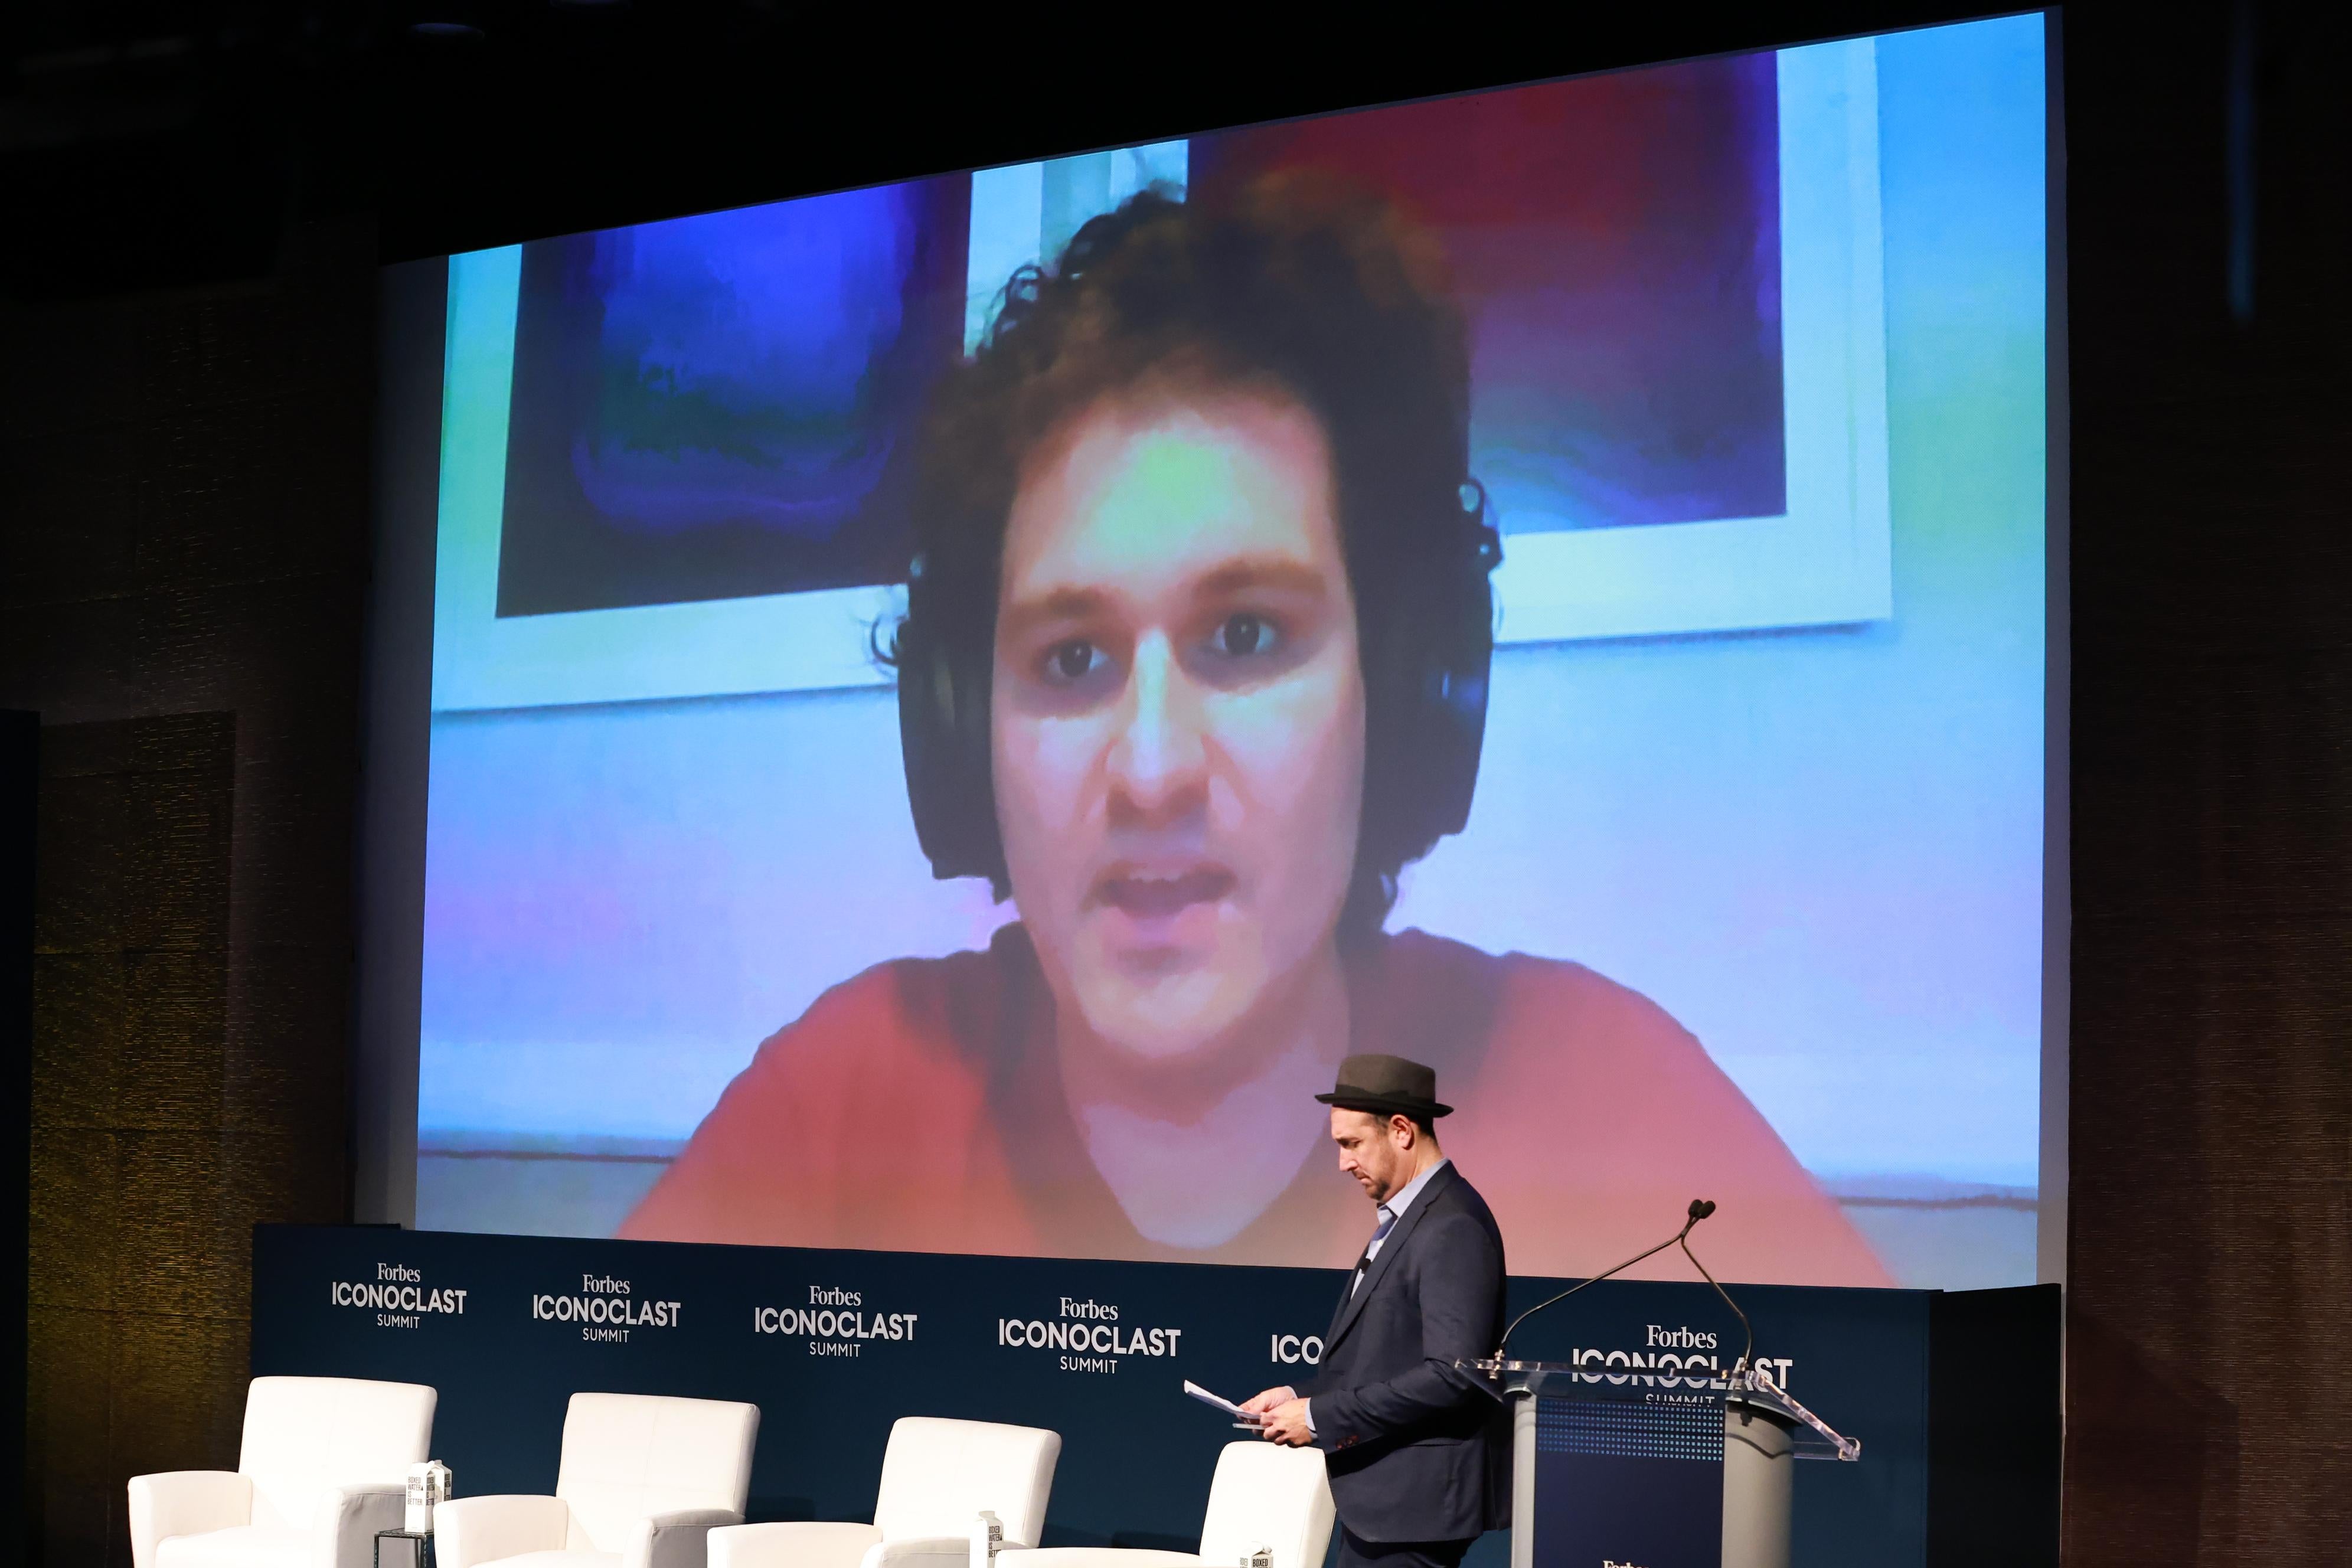 NEW YORK, NEW YORK - NOVEMBER 03: Sam Bankman-Fried attends via video call during the 2022 Forbes Iconoclast Summit at New York Historical Society on November 03, 2022 in New York City. (Photo by Arturo Holmes/Getty Images)